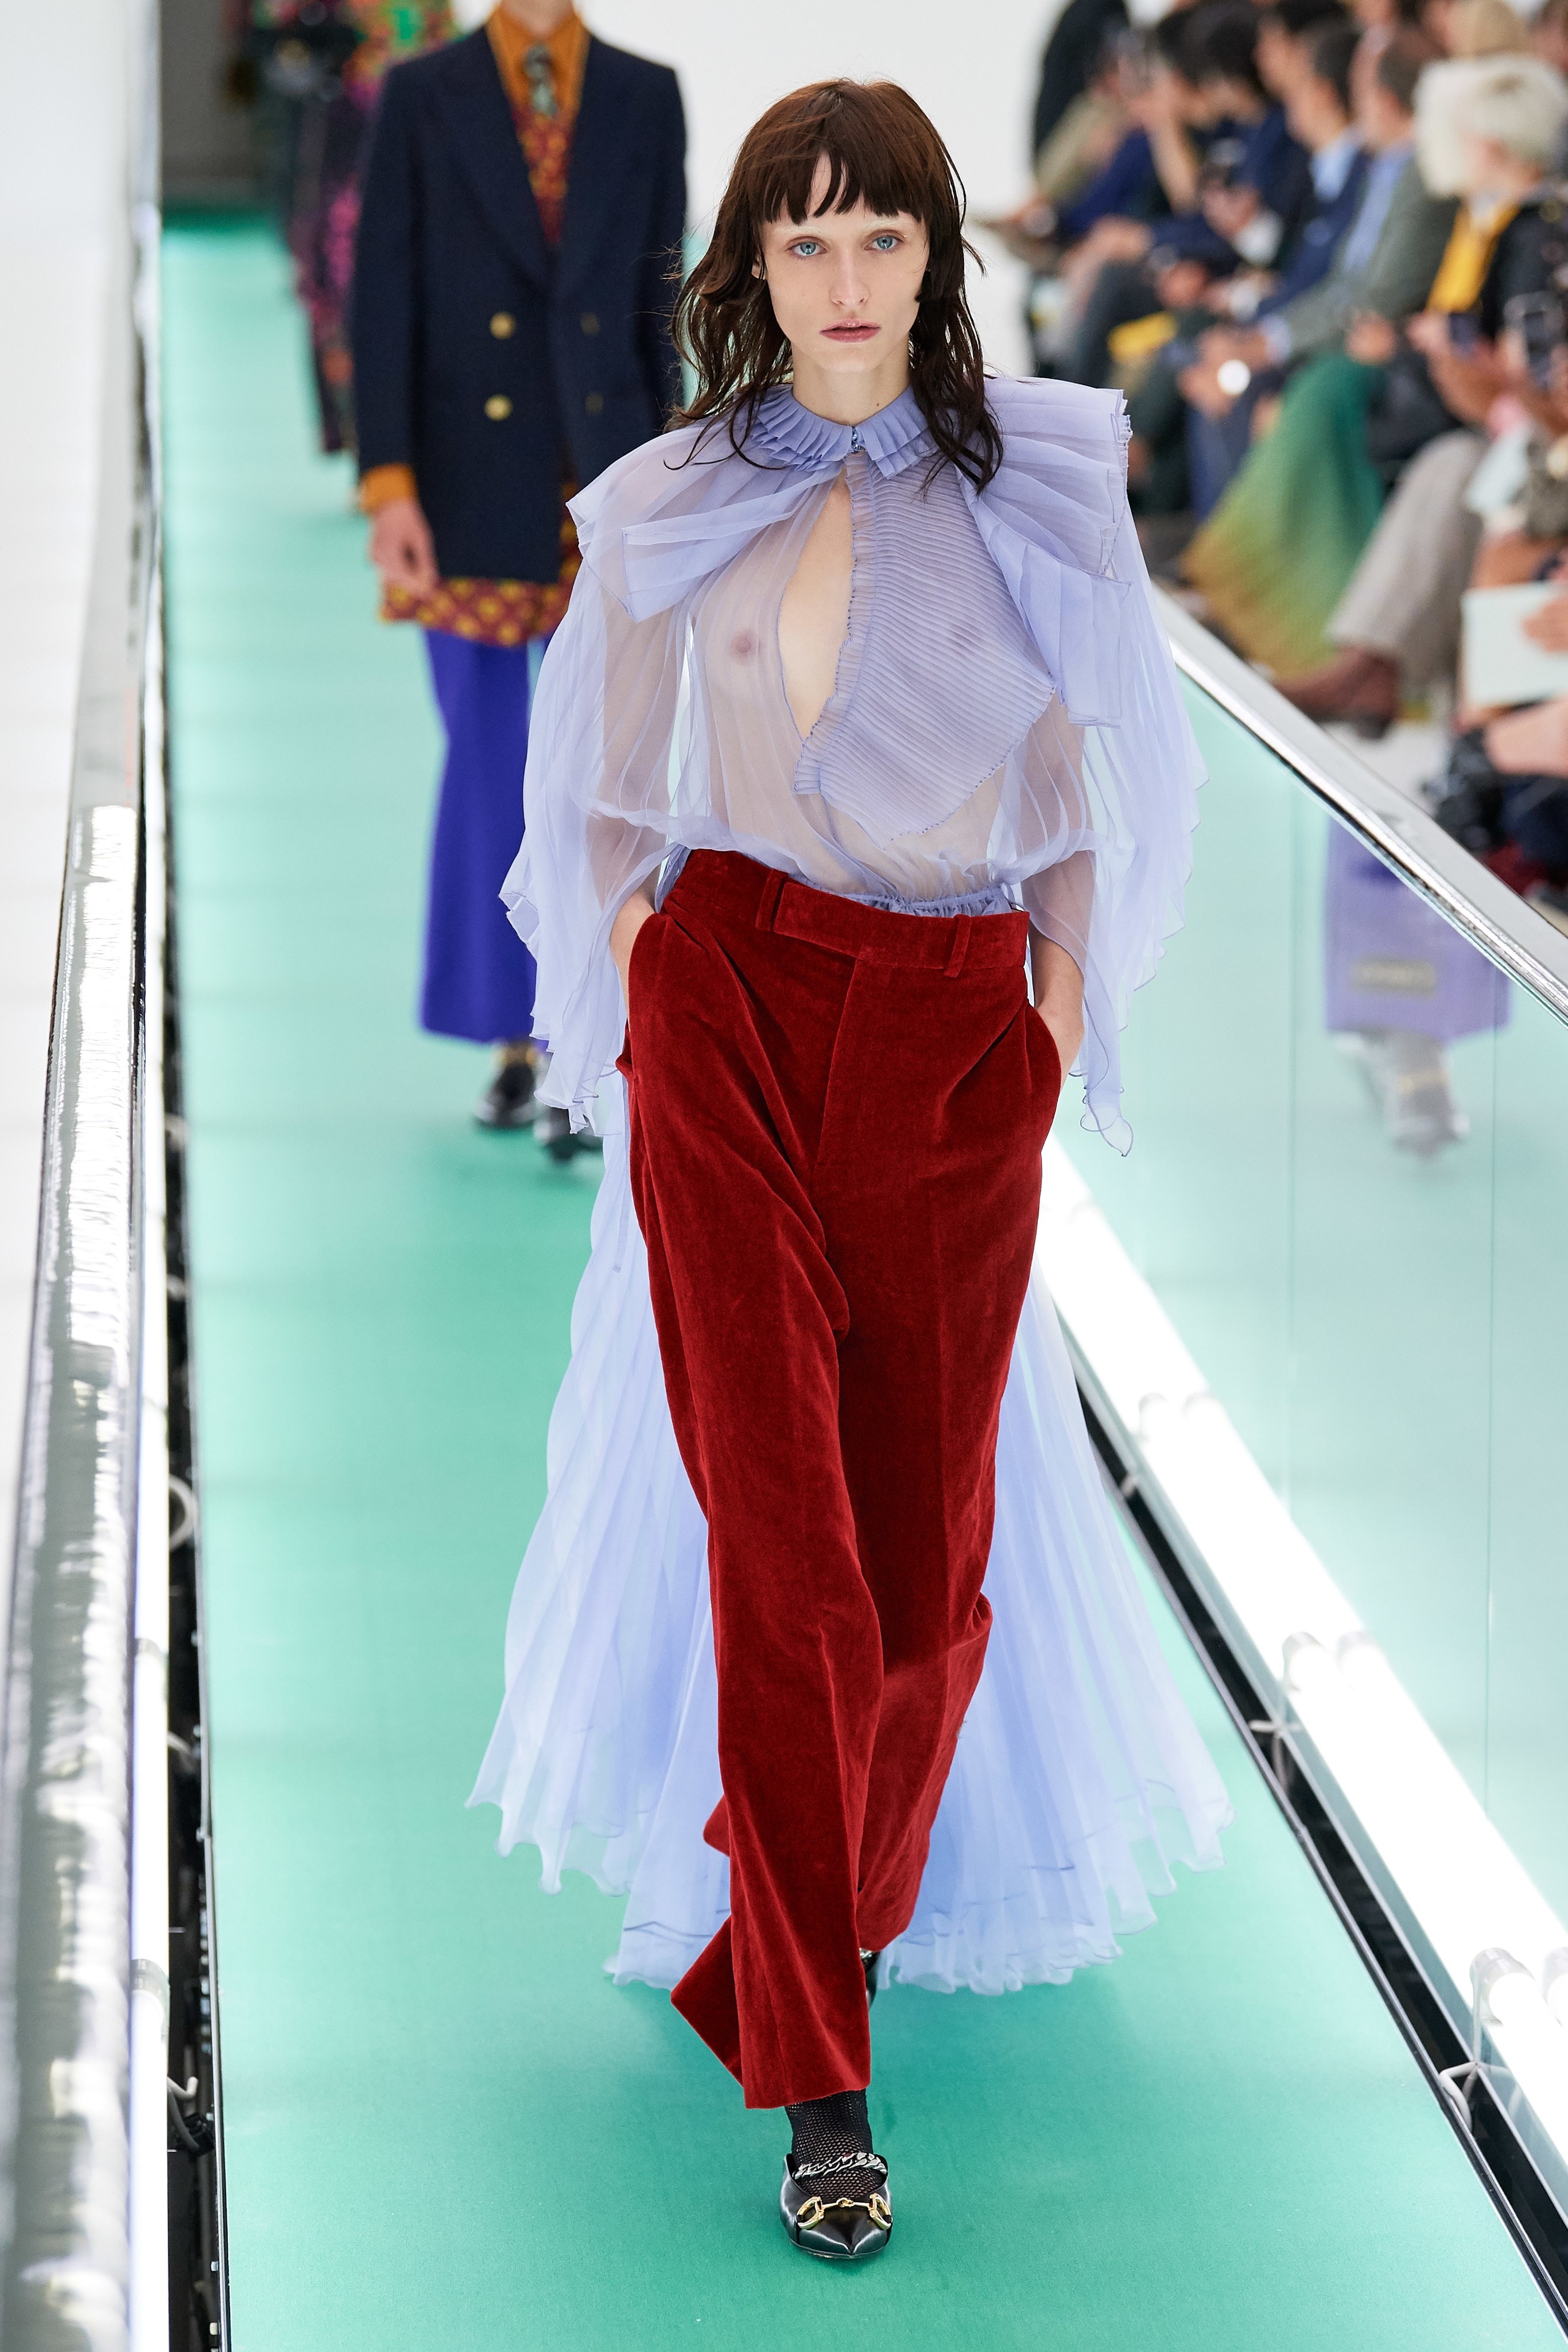 gucci spring 2020 ready to wear Alessandro Michele Milan Fashion Week